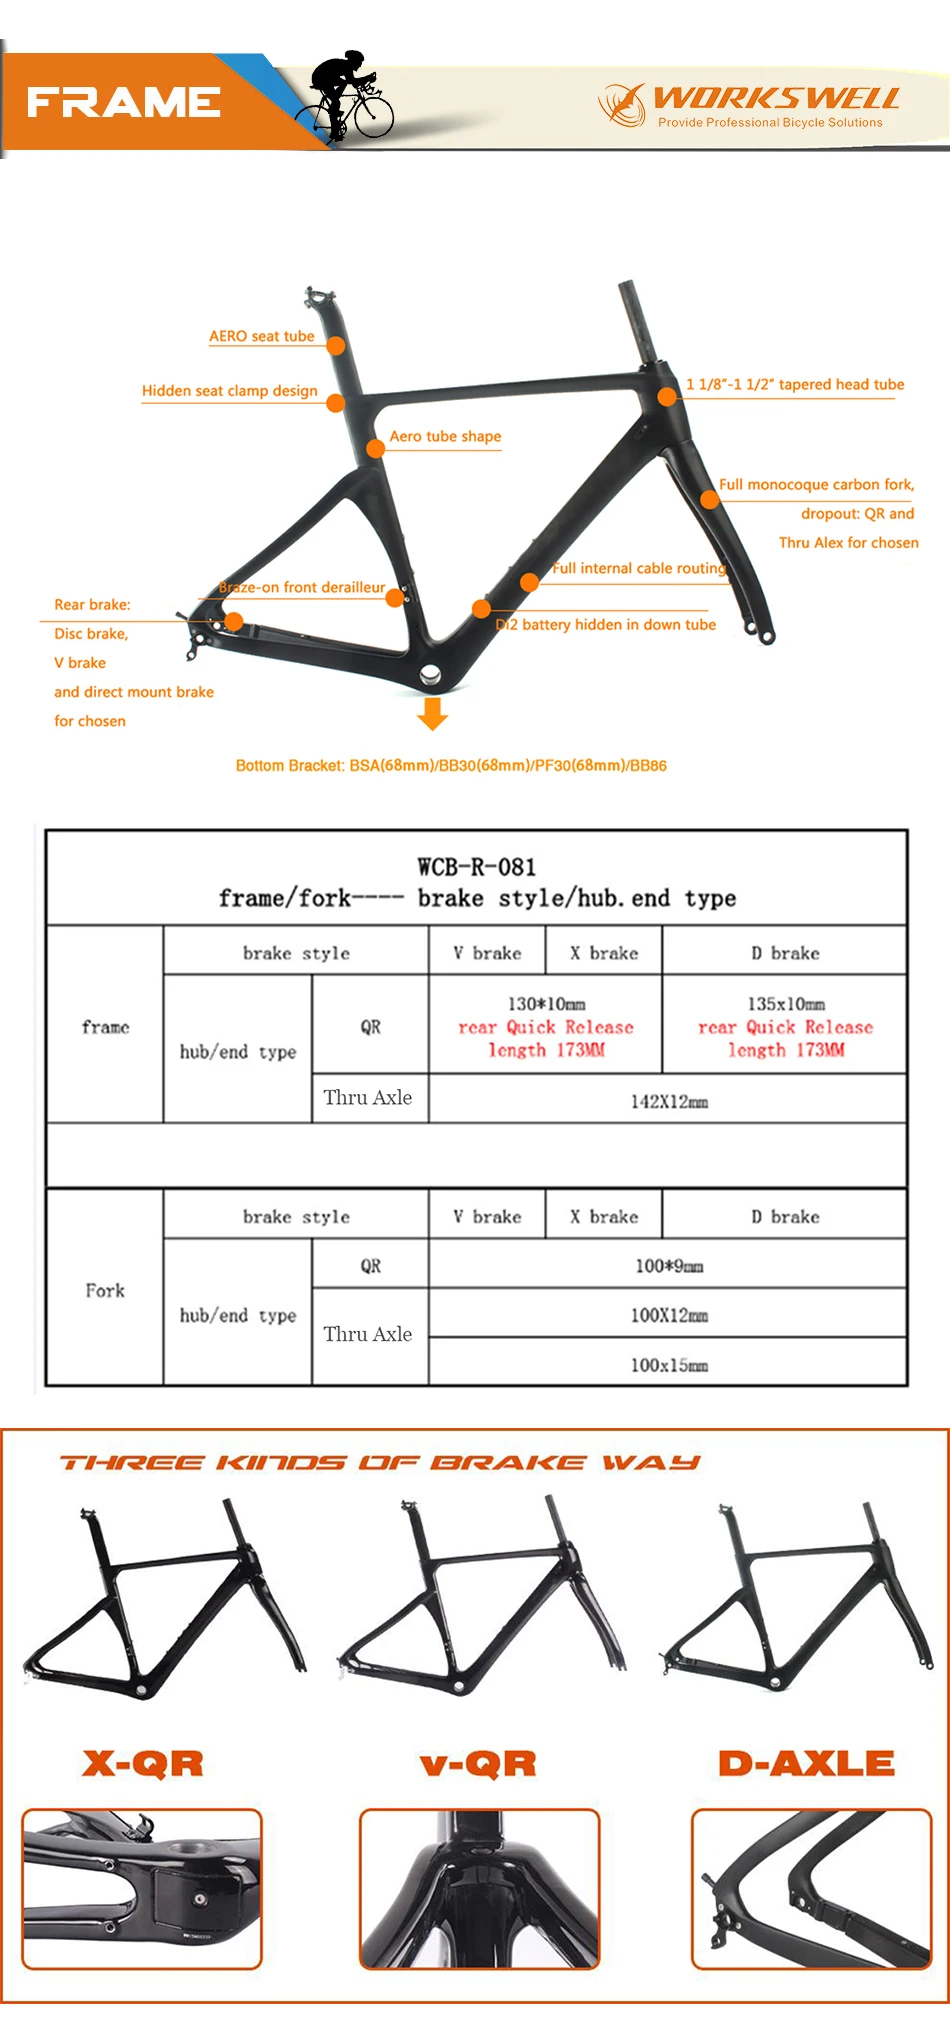 Flash Deal WORKSWELL  Frame Carbon Road 2017 Bicycle Quadro de Bicicleta Chinese Road racing frame thru axle 2